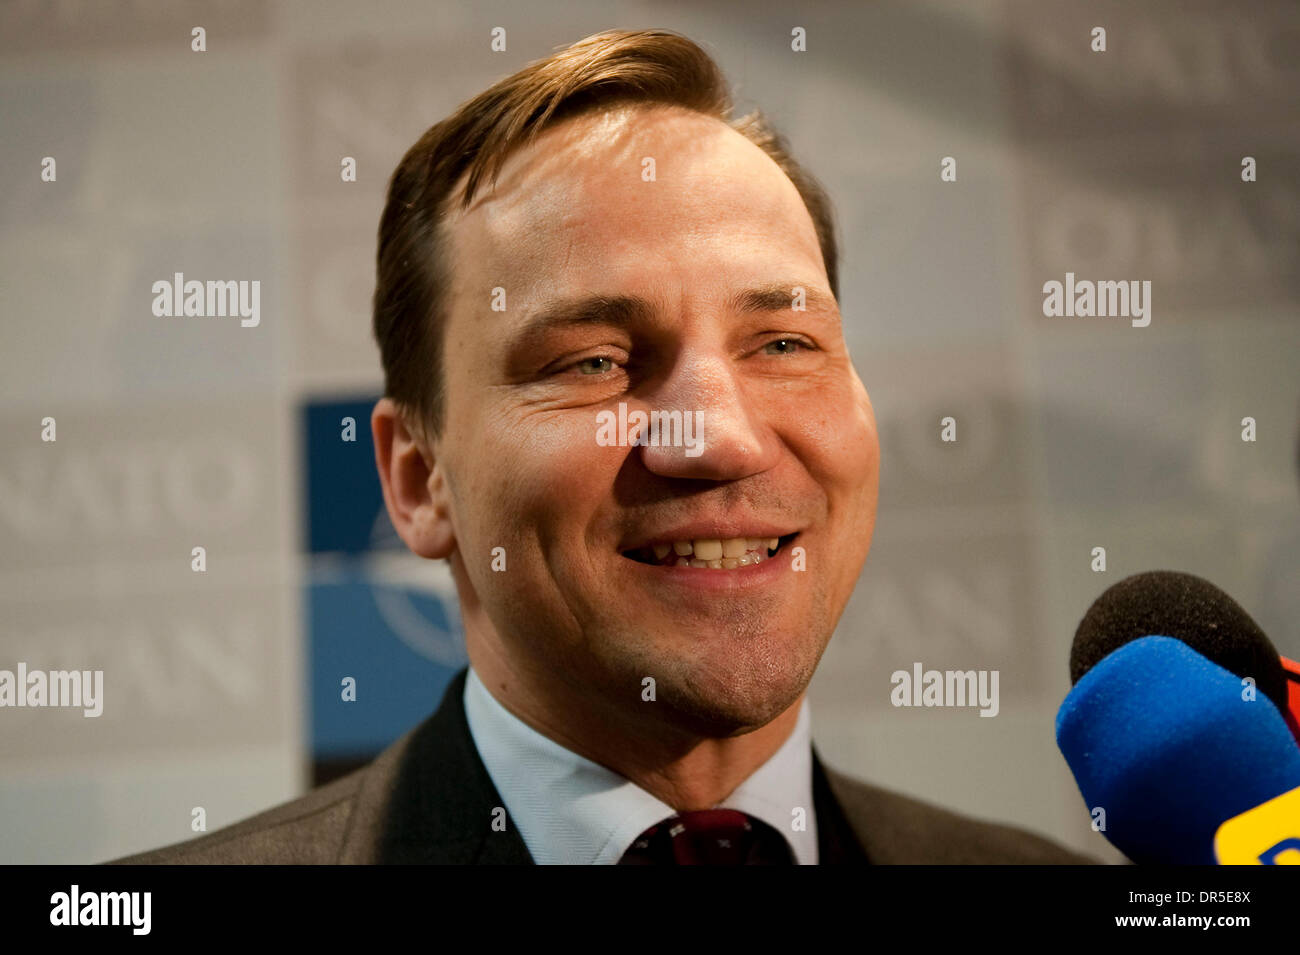 Mar 05, 2009 - Brussels, Belgium - Polish Foreign Minister RADEK SIKORSKI during press briefing after the end of first meeting in Brussels, Belgium on 2009-03-05. NATO Secretary General Jaap de Hoop Scheffer called for the alliance to resume top-level talks with Russia which have been frozen since last August's war in Georgia. (Credit Image: © Wiktor Dabkowski/ZUMA Press) Stock Photo